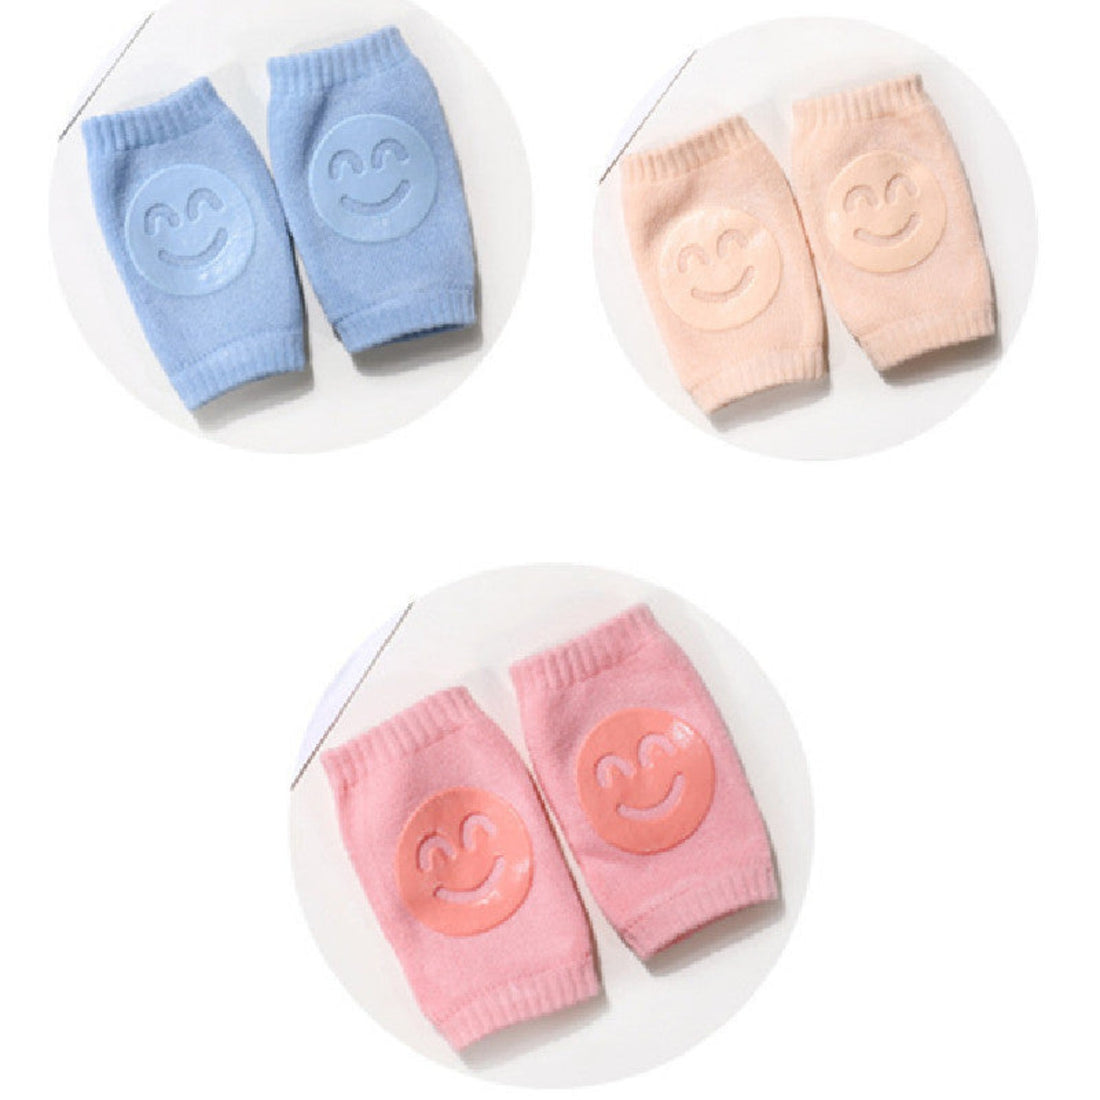 Breathable baby knee pads and socks